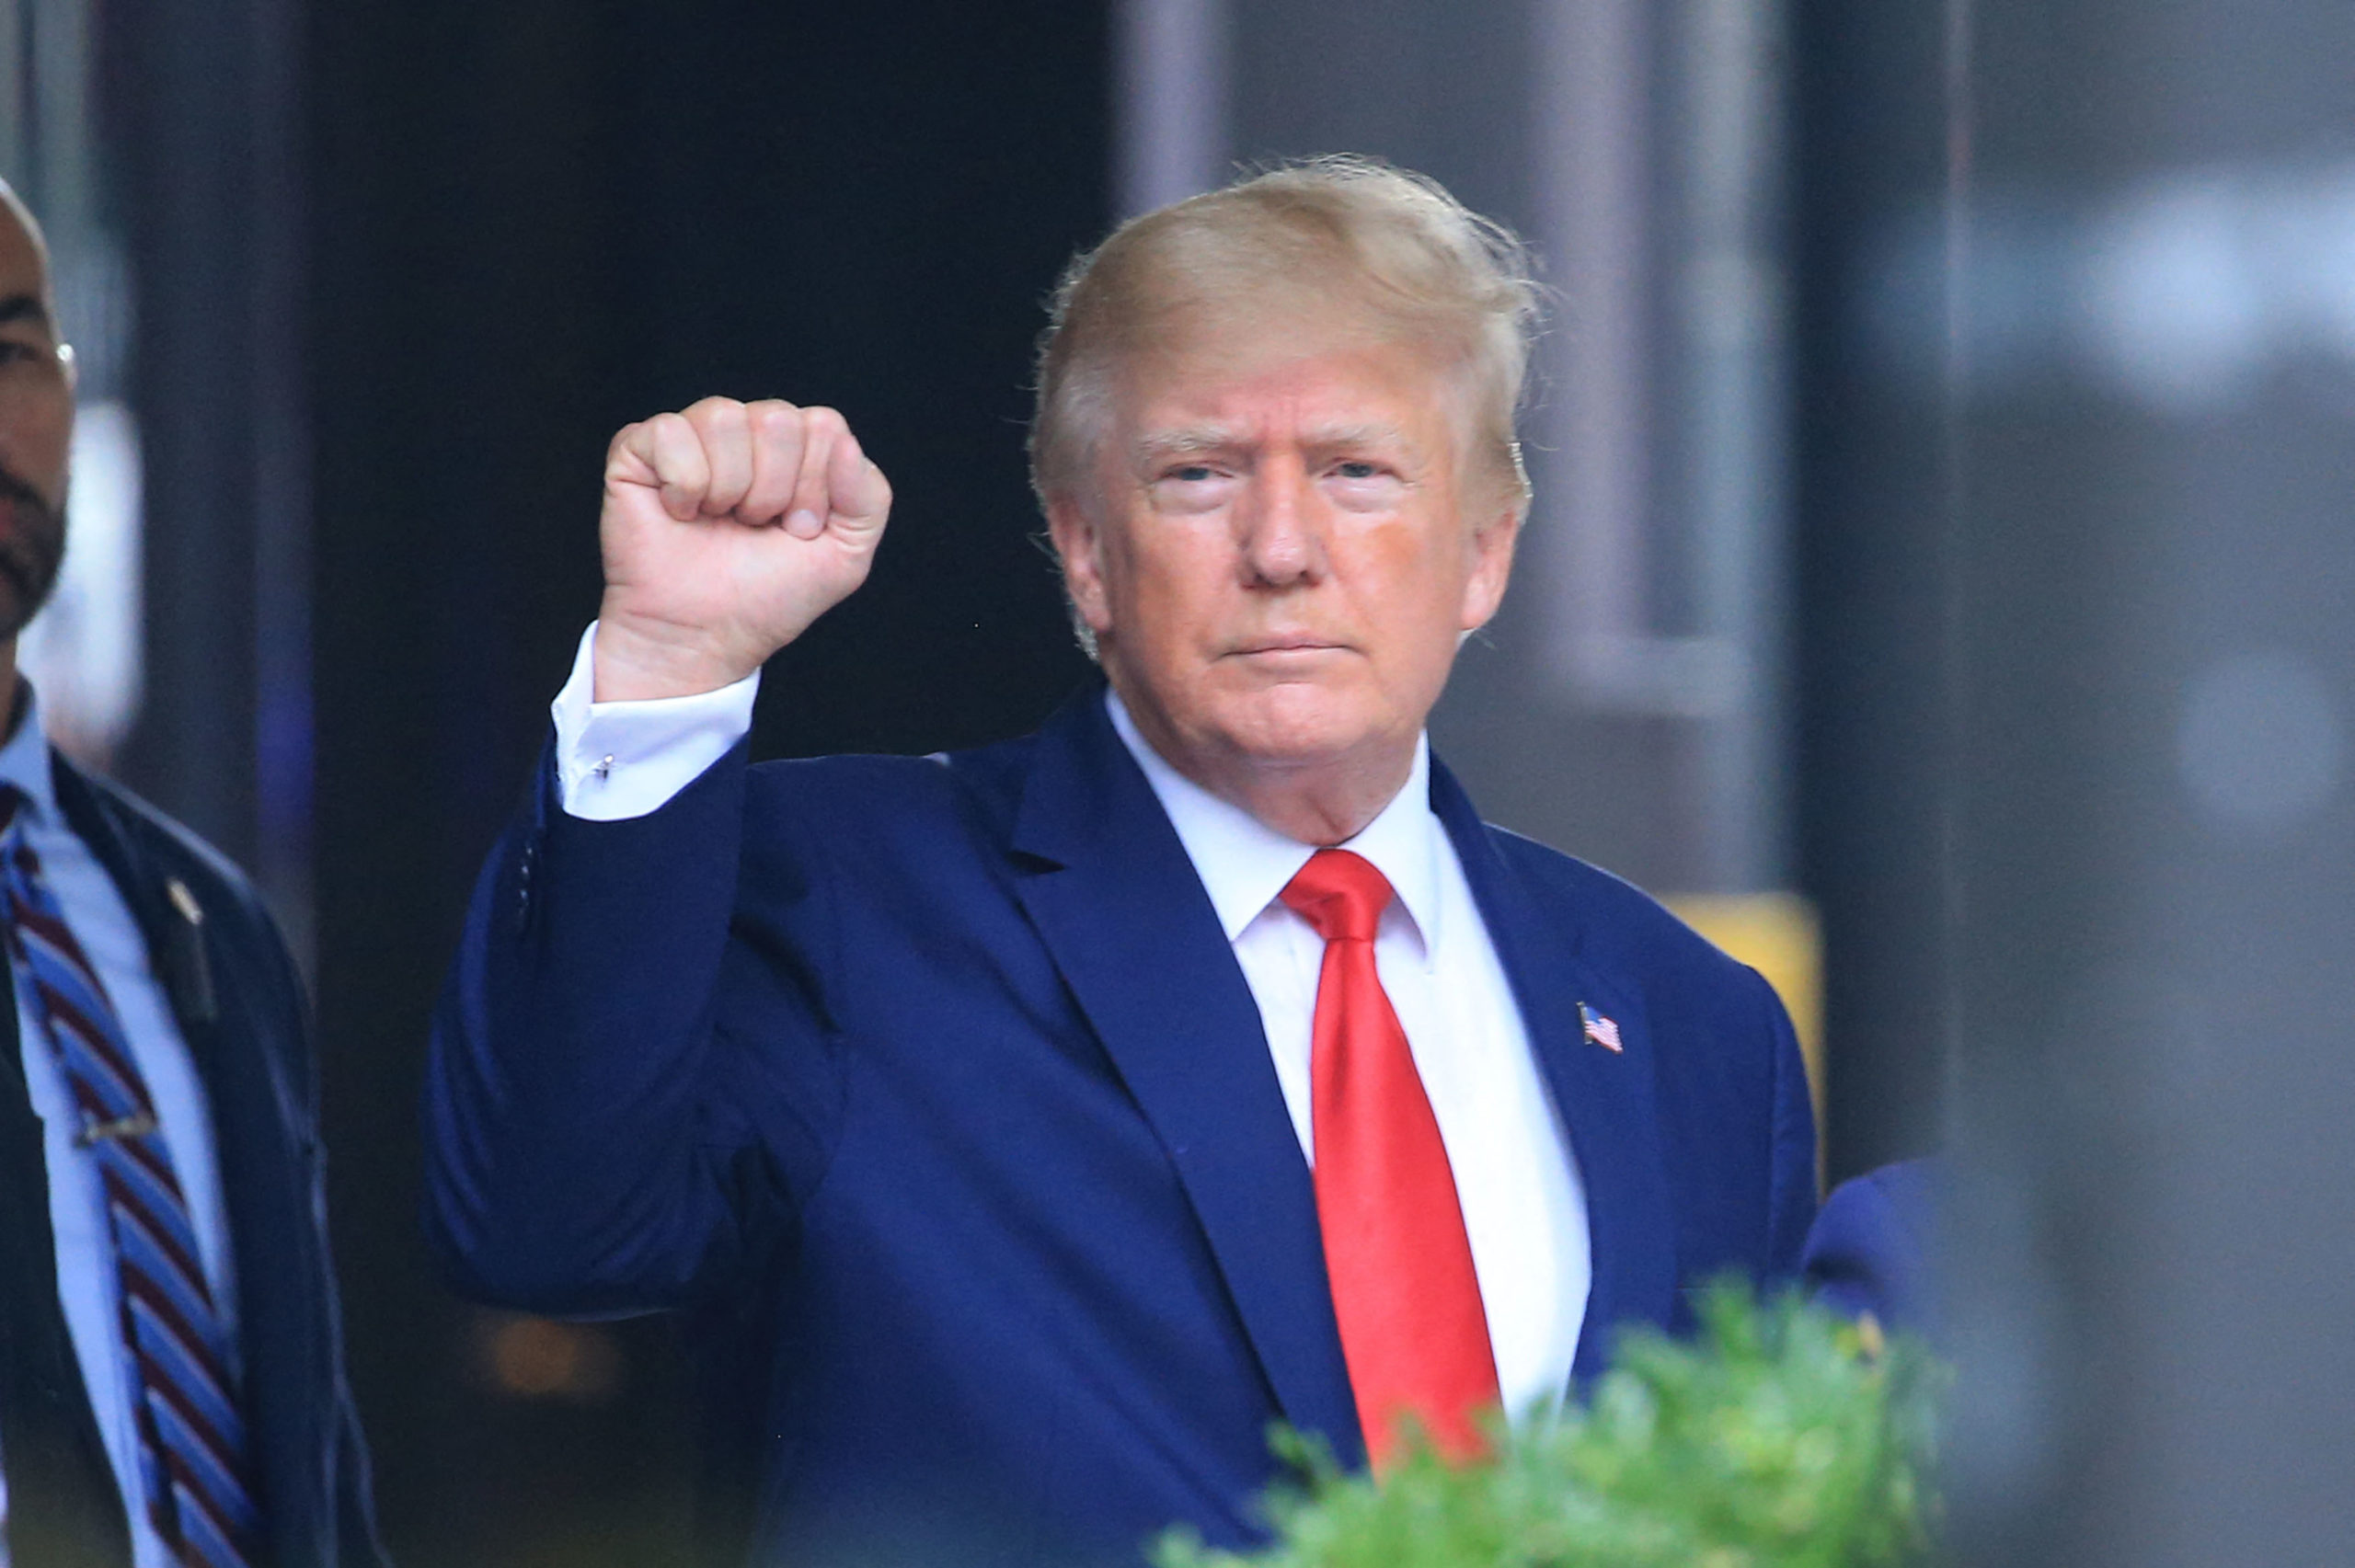 Former US President Donald Trump raises his fist while walking to a vehicle outside of Trump Tower in New York City on August 10, 2022. - Donald Trump on Wednesday declined to answer questions under oath in New York over alleged fraud at his family business, as legal pressures pile up for the former president whose house was raided by the FBI just two days ago. (Photo by STRINGER/AFP via Getty Images)